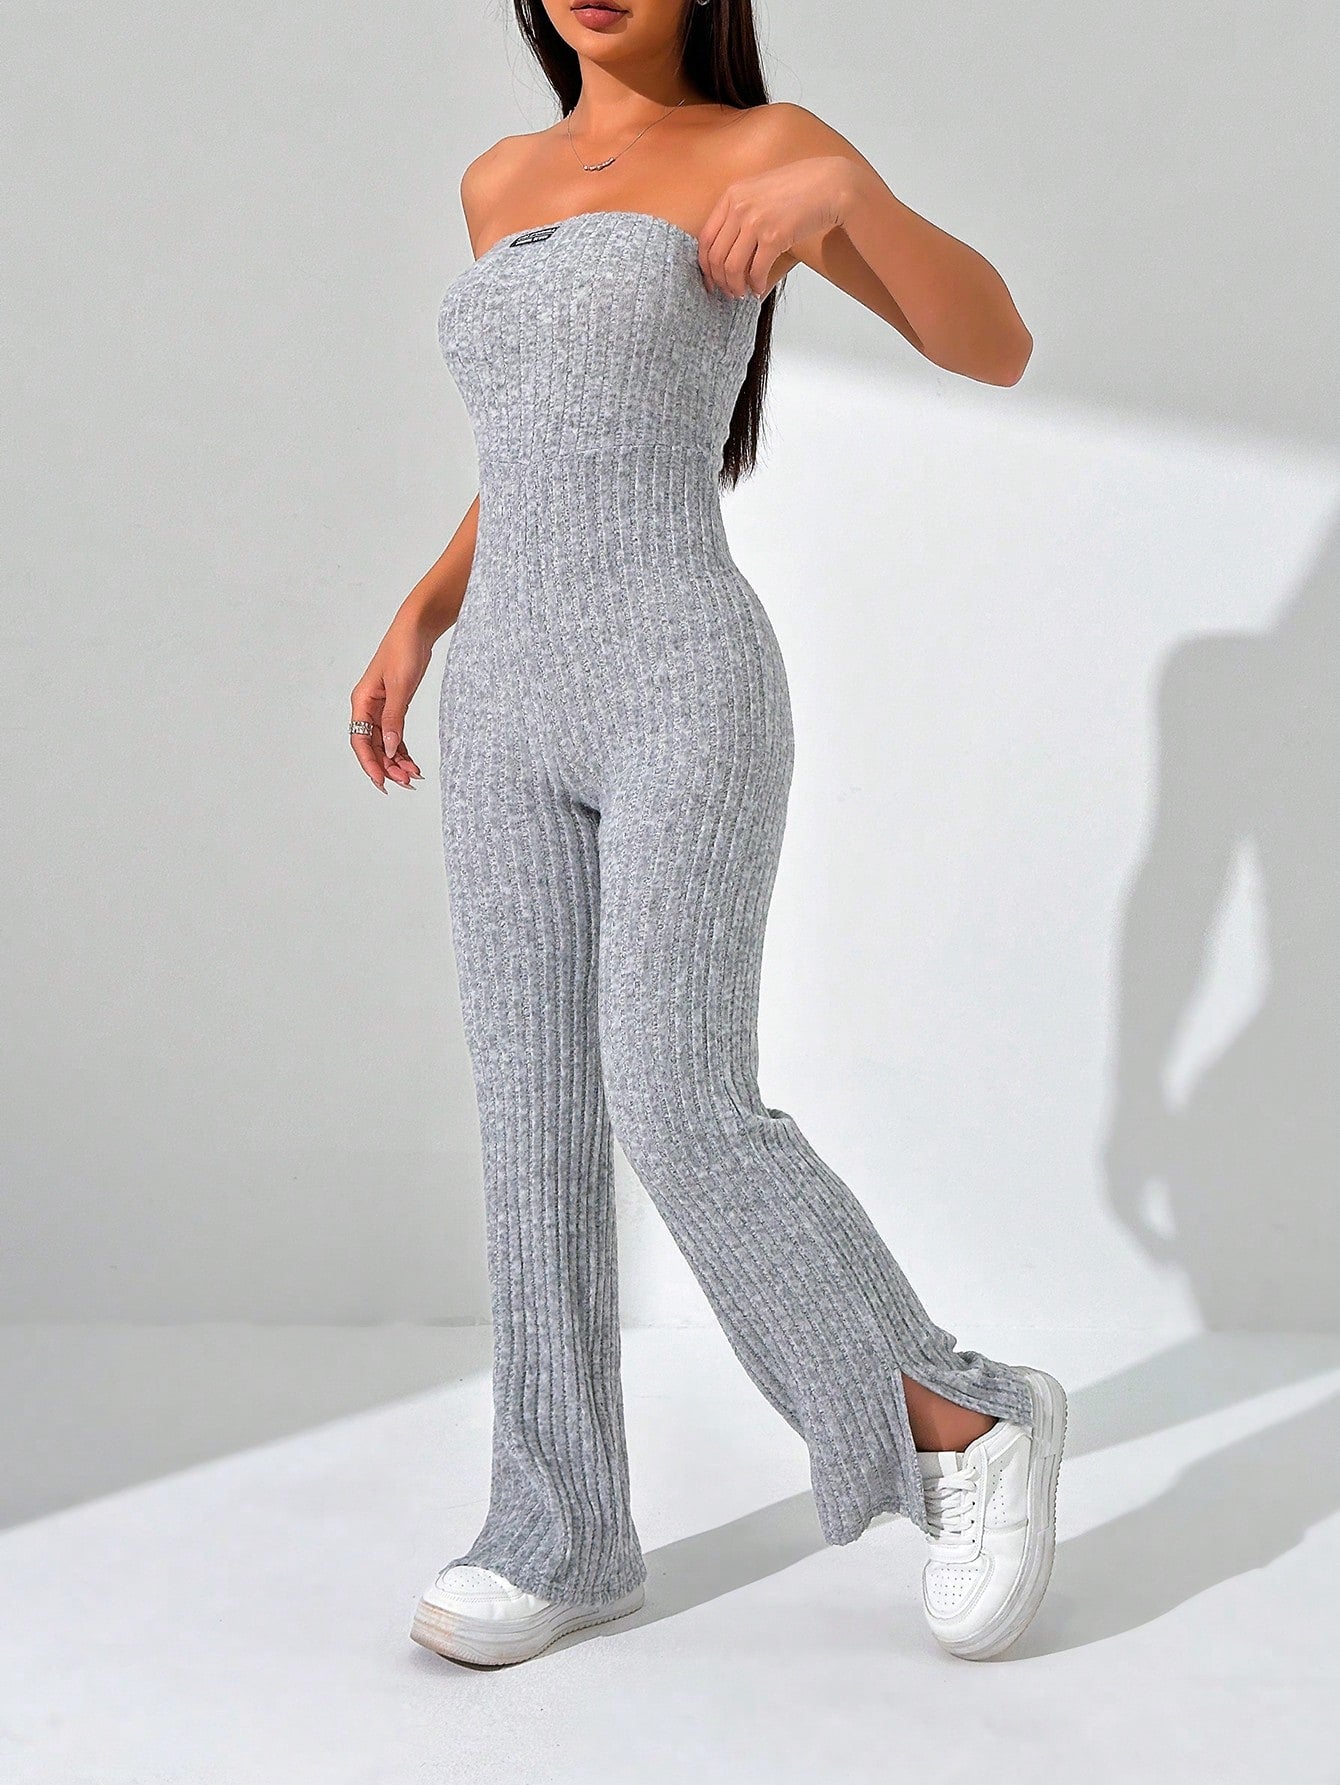 Women's Letter Print Jumpsuit With Plaid And Ribbed Details